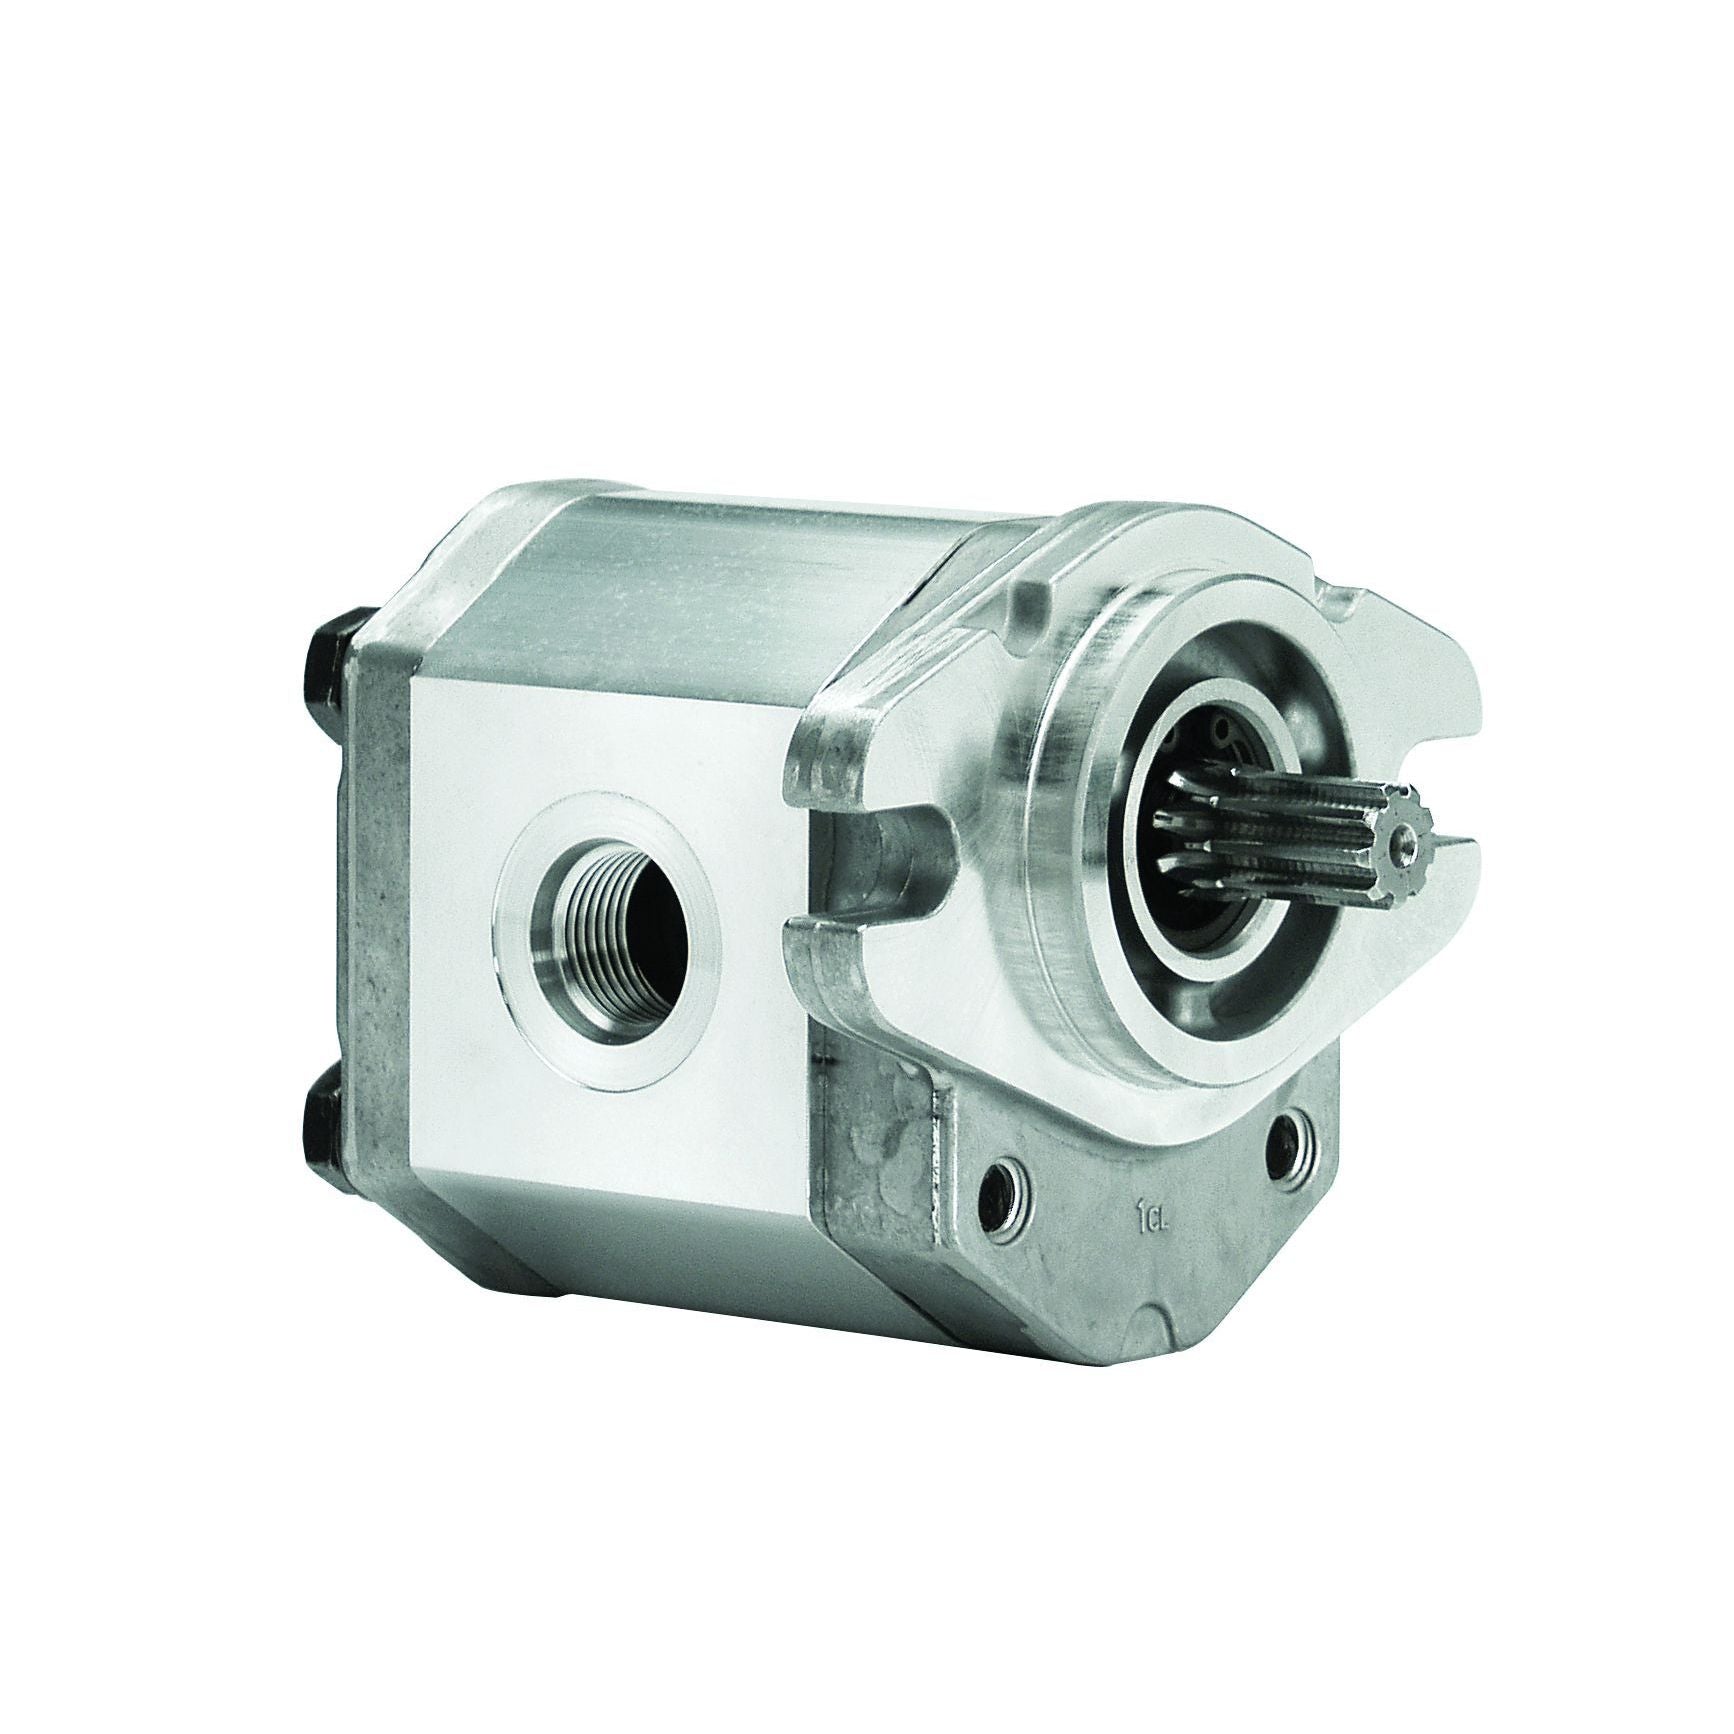 ALP2A-D-16-S1 : Marzocchi Gear Pump, CW, 11.5cc (0.7015in3), 5.47 GPM, 3335psi, 4000 RPM, #12 SAE (3/4") In, #10 SAE (5/8") Out, Splined Shaft 9T 16/32DP, SAE A 2-Bolt Mount